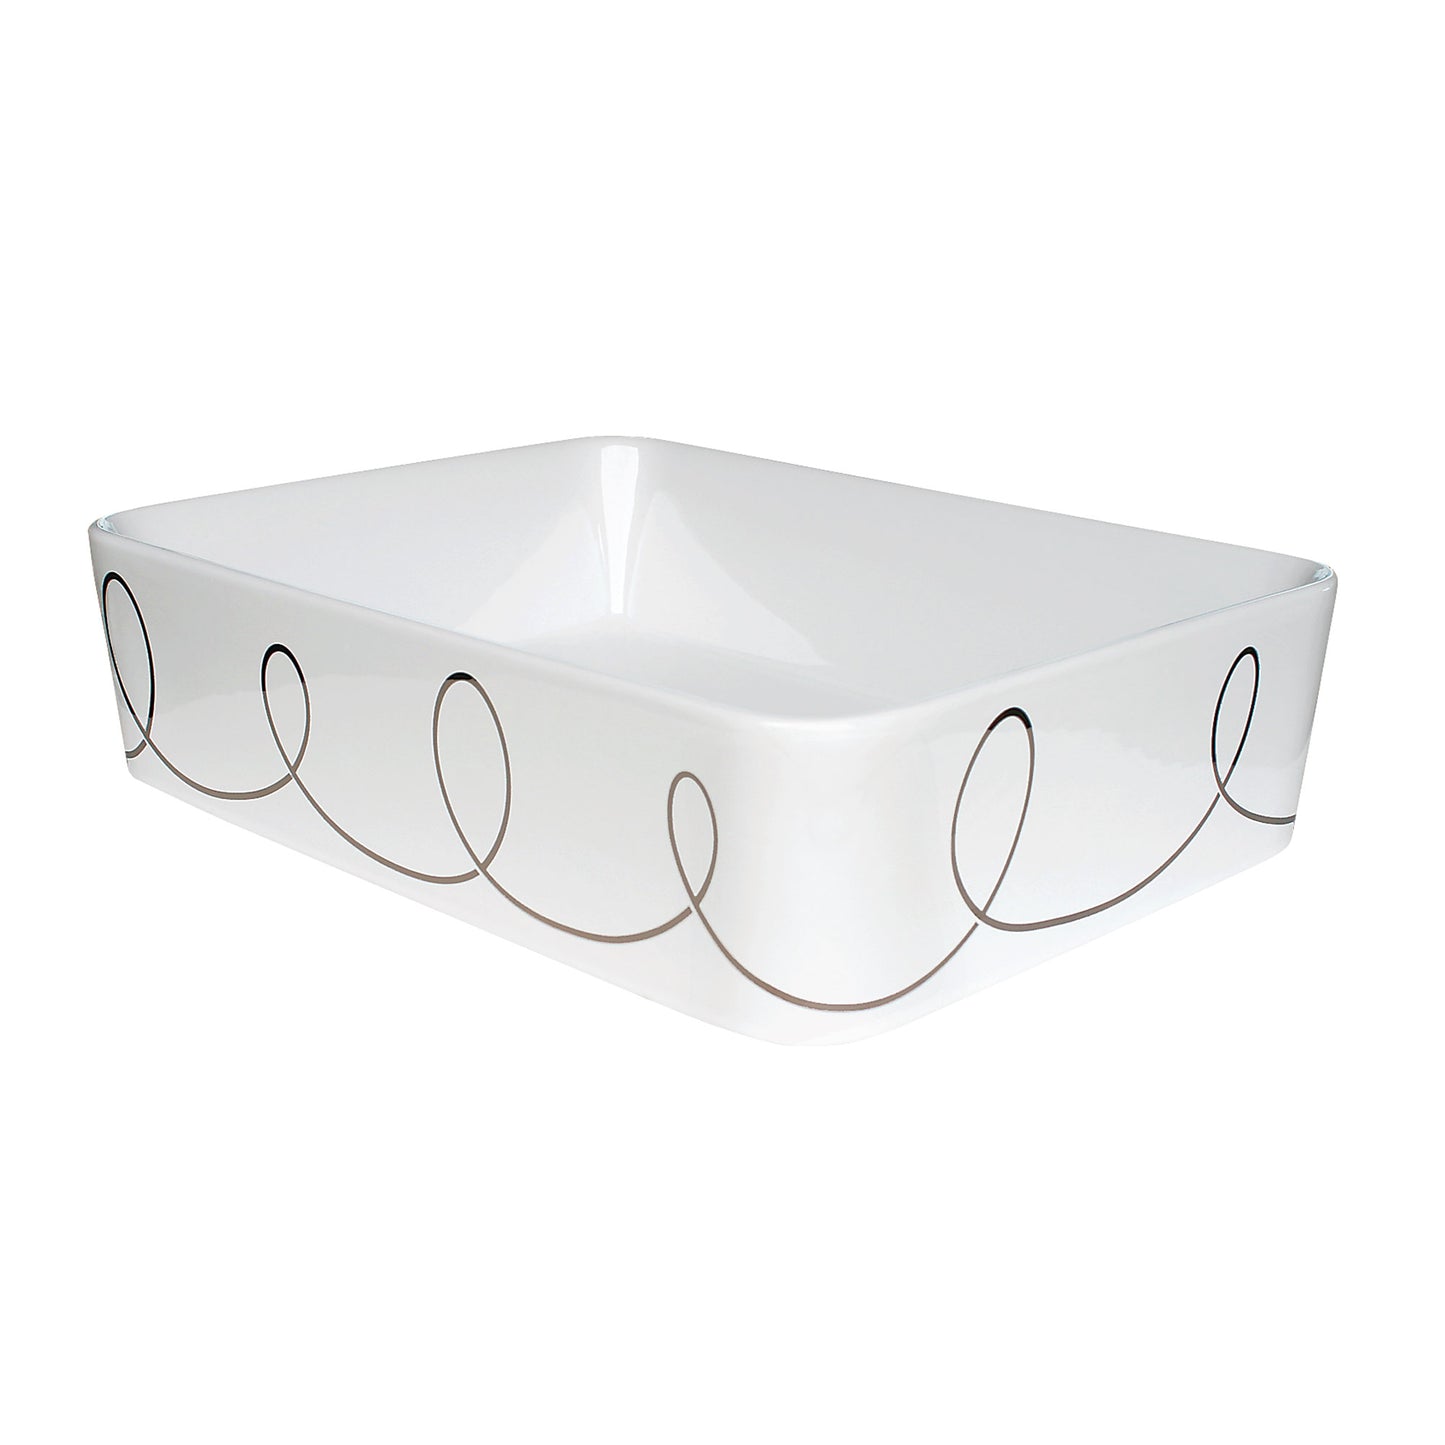 Rectangle vessel sink painted with cool silver loops